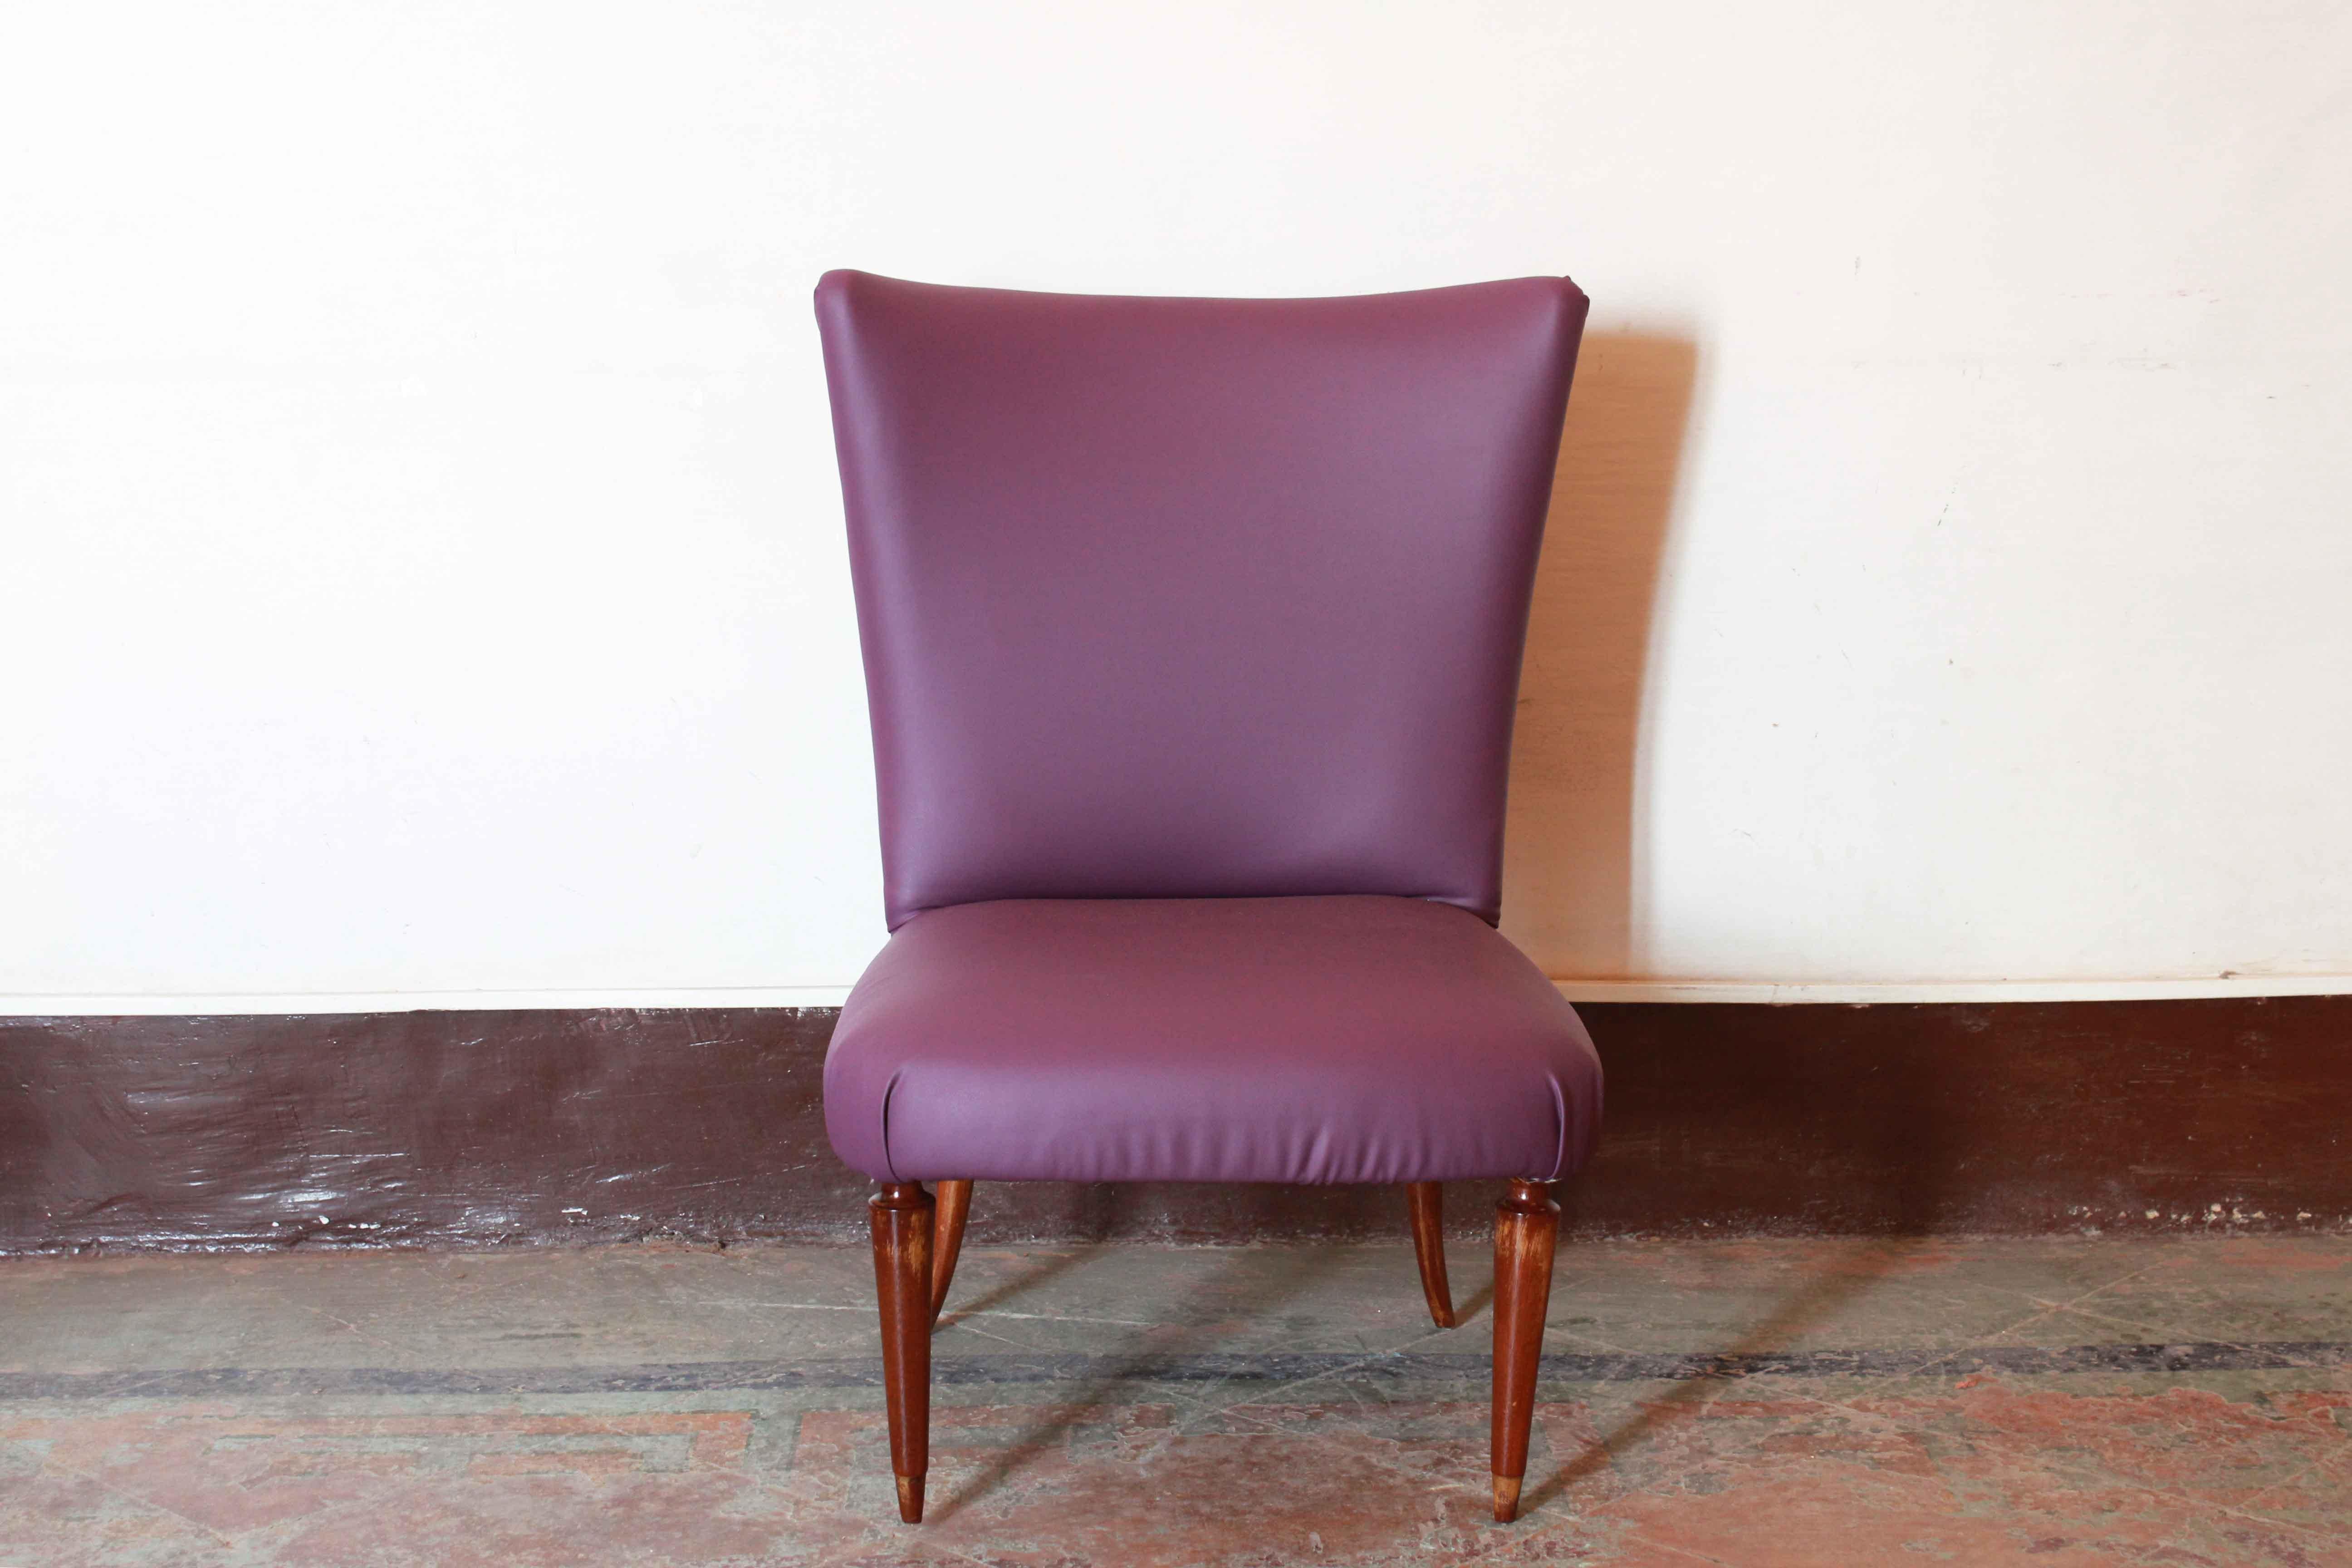 A Pop restyle made on two 1950s Italian vintage corner chairs colored leatherette (pink and purple) has been added on original structure. The wood parts have been polished and cleaned and the structure seats renovated.